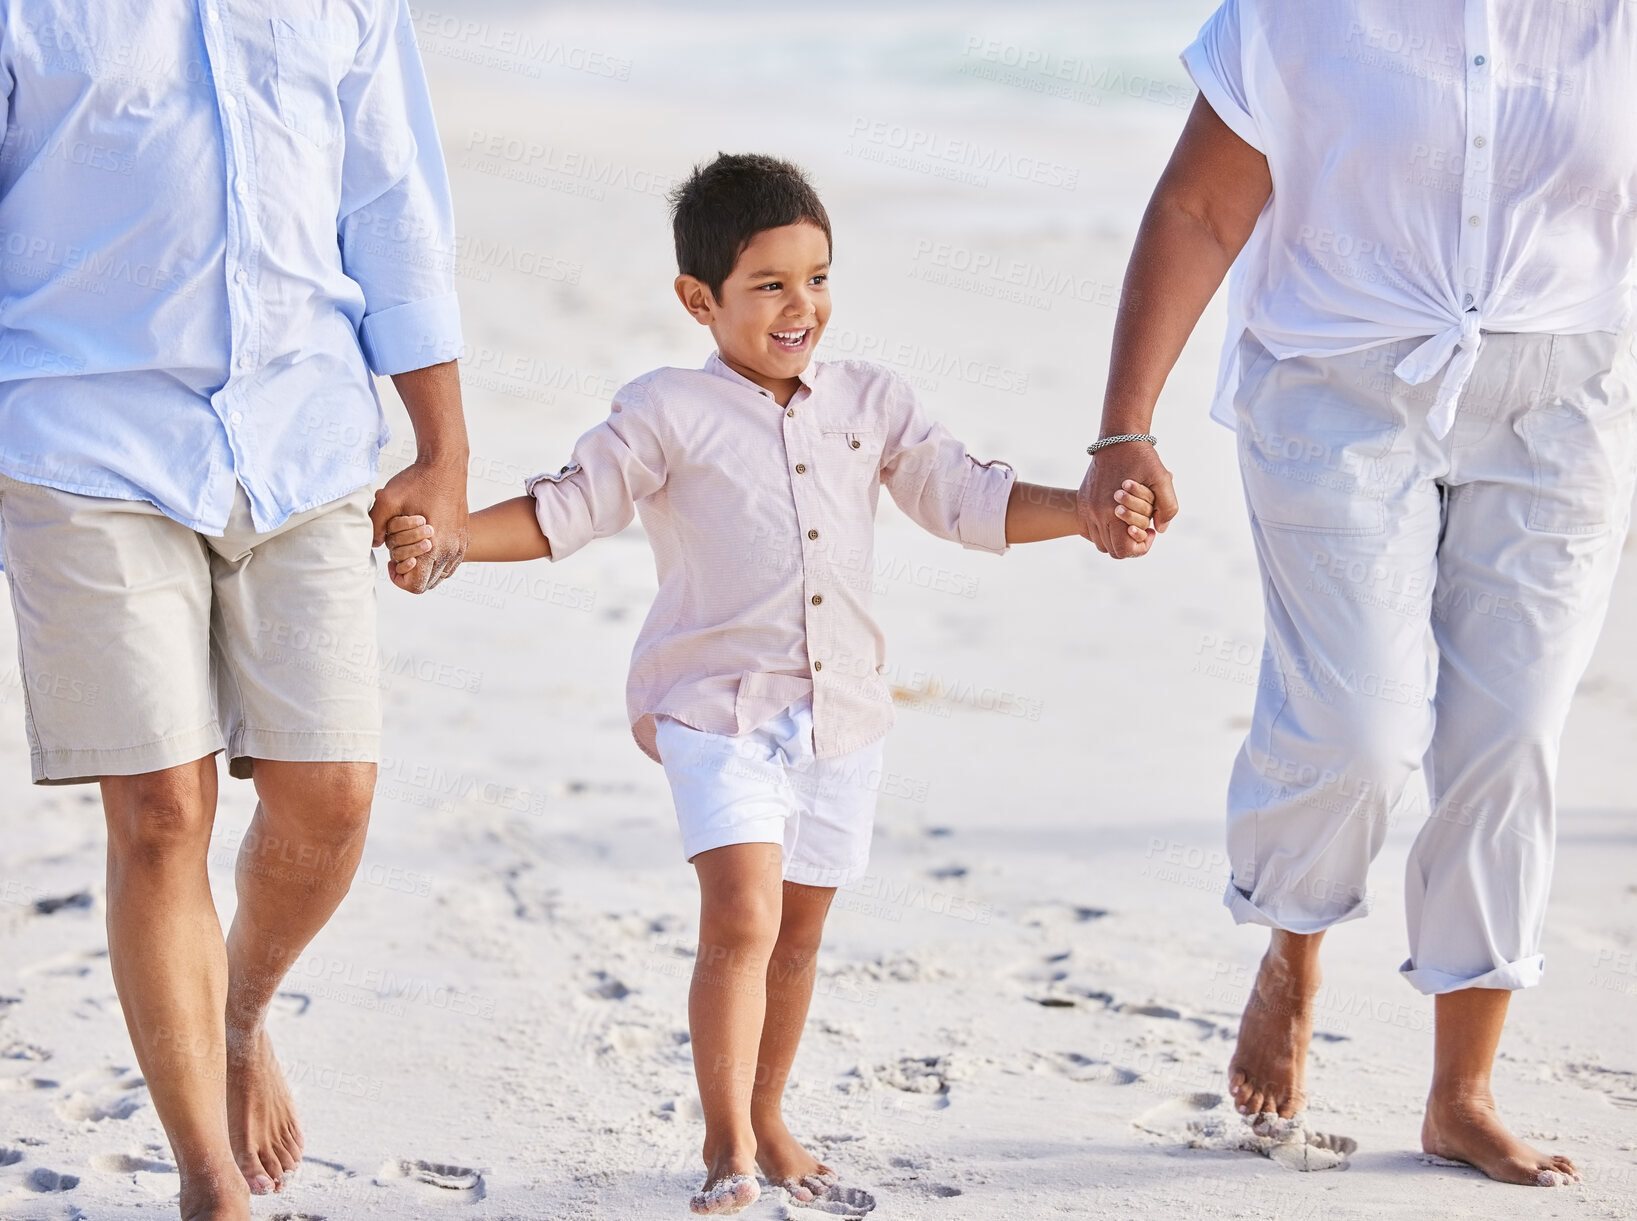 Buy stock photo Holding hands, beach or parents walking with a happy child for a holiday vacation together with happiness. Travel, mother and father playing or enjoying family time with a young boy or kid in summer